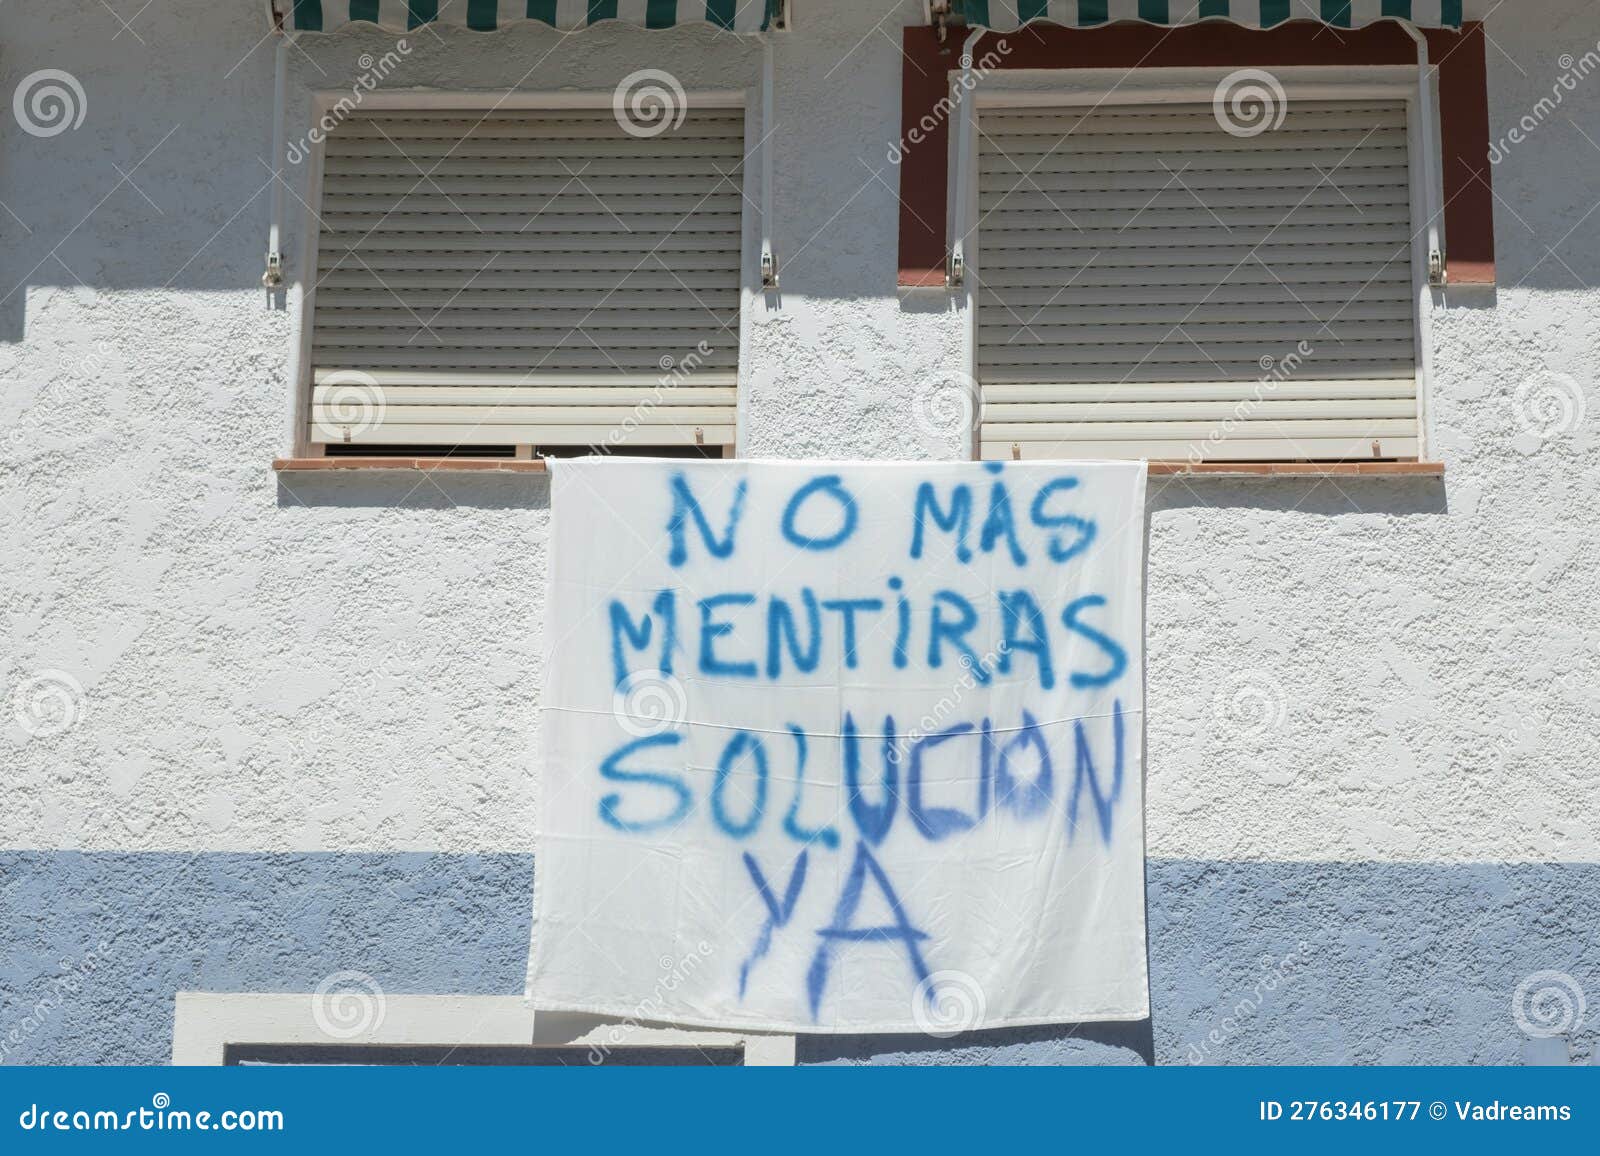 banner on building wall with spanish words no mas mentiras, solucion ya. people protest, disagreement with local